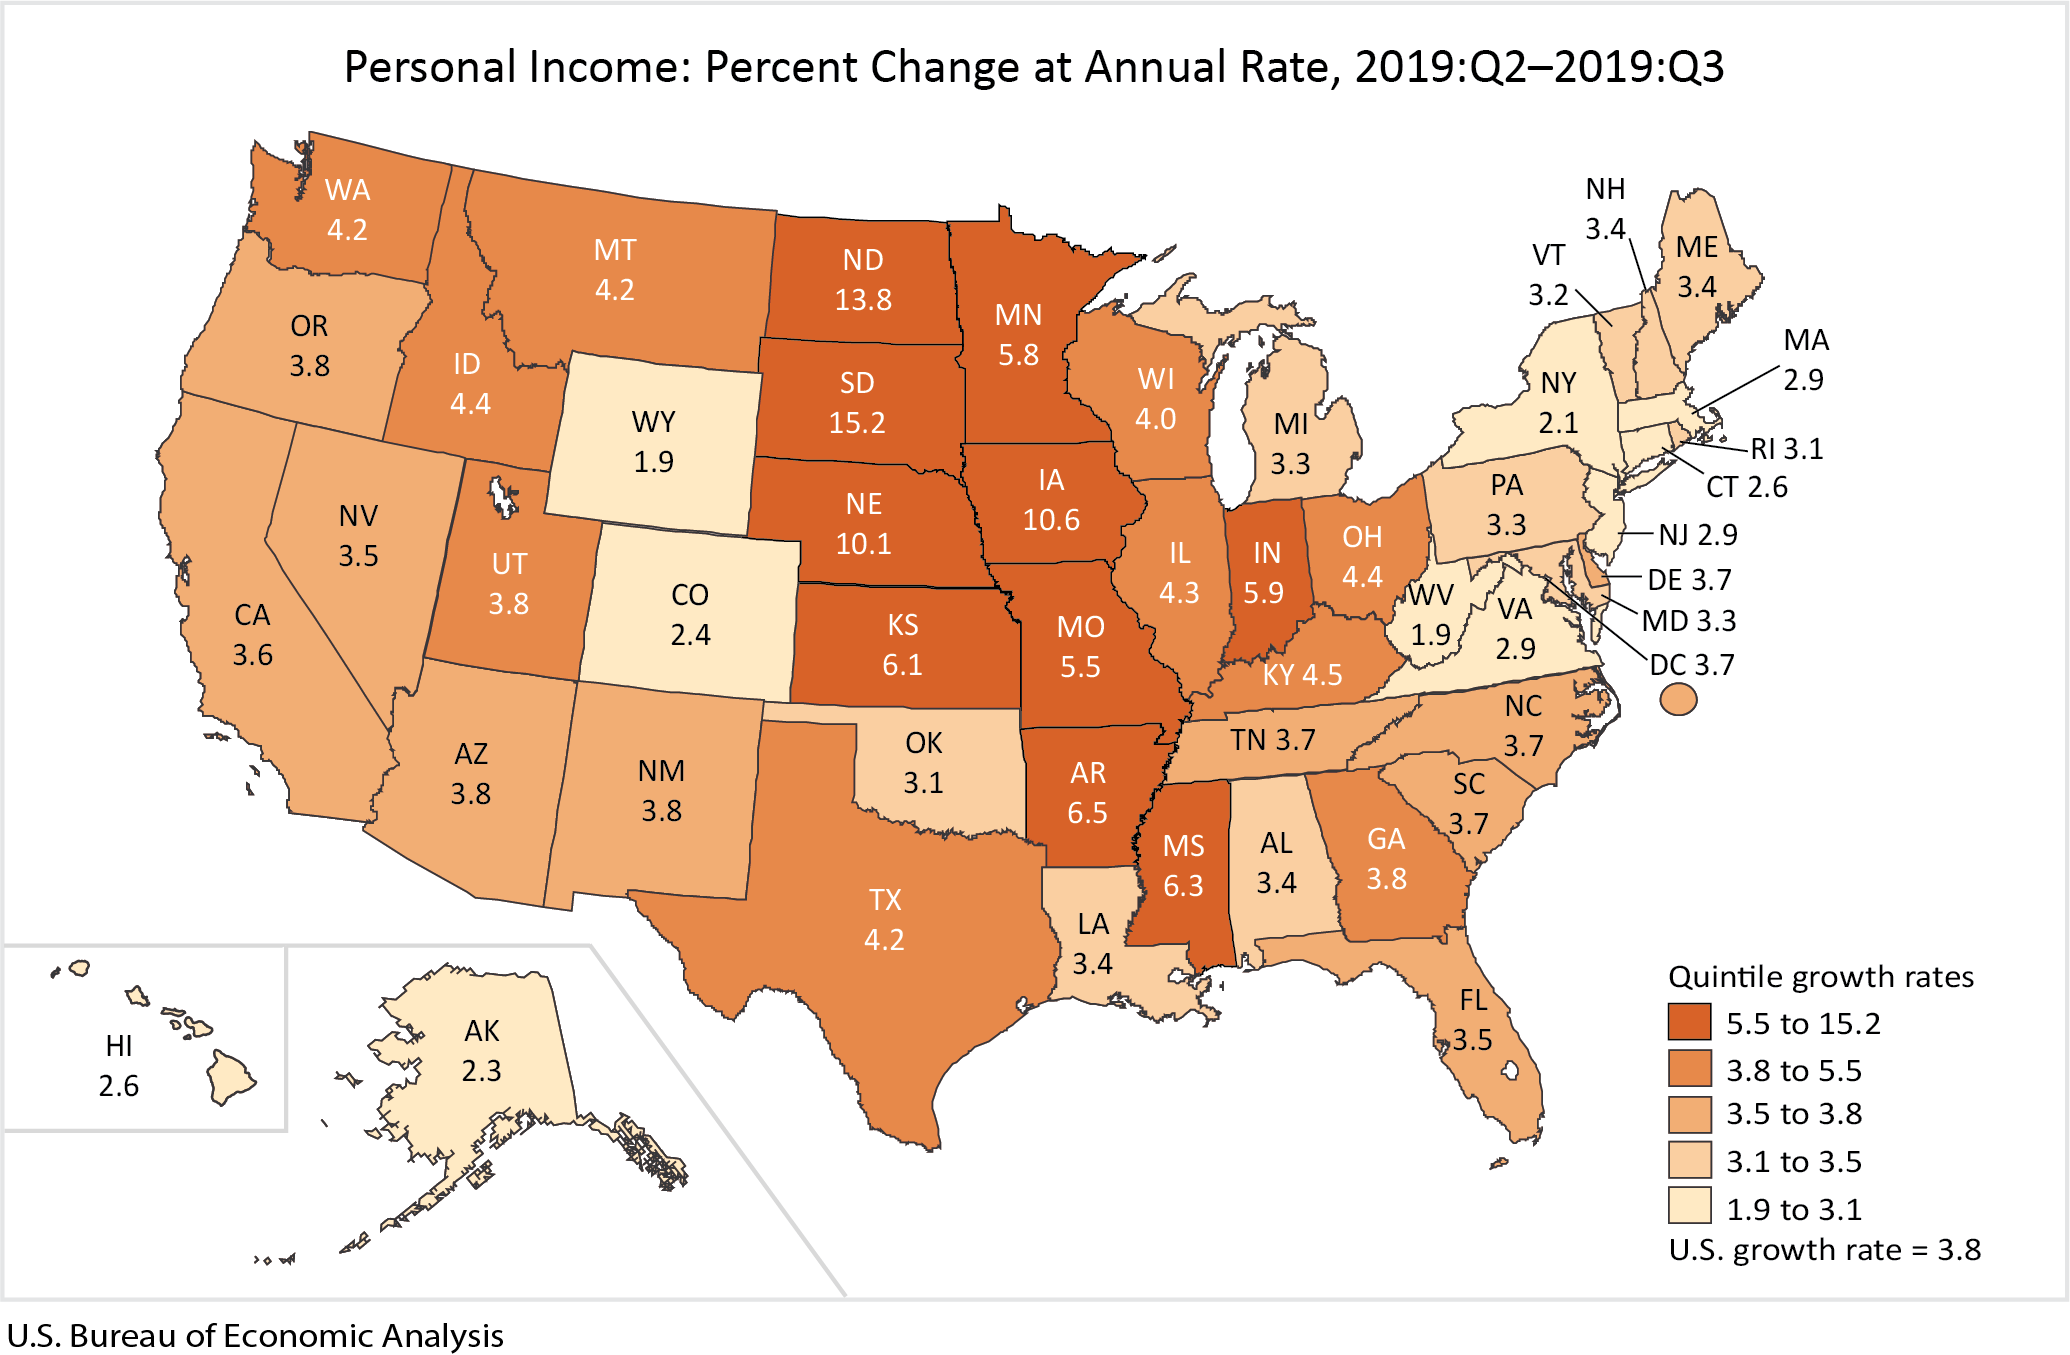 Personal Income: Percent Change at Annual Rate, 2019:Q2-2019:Q3